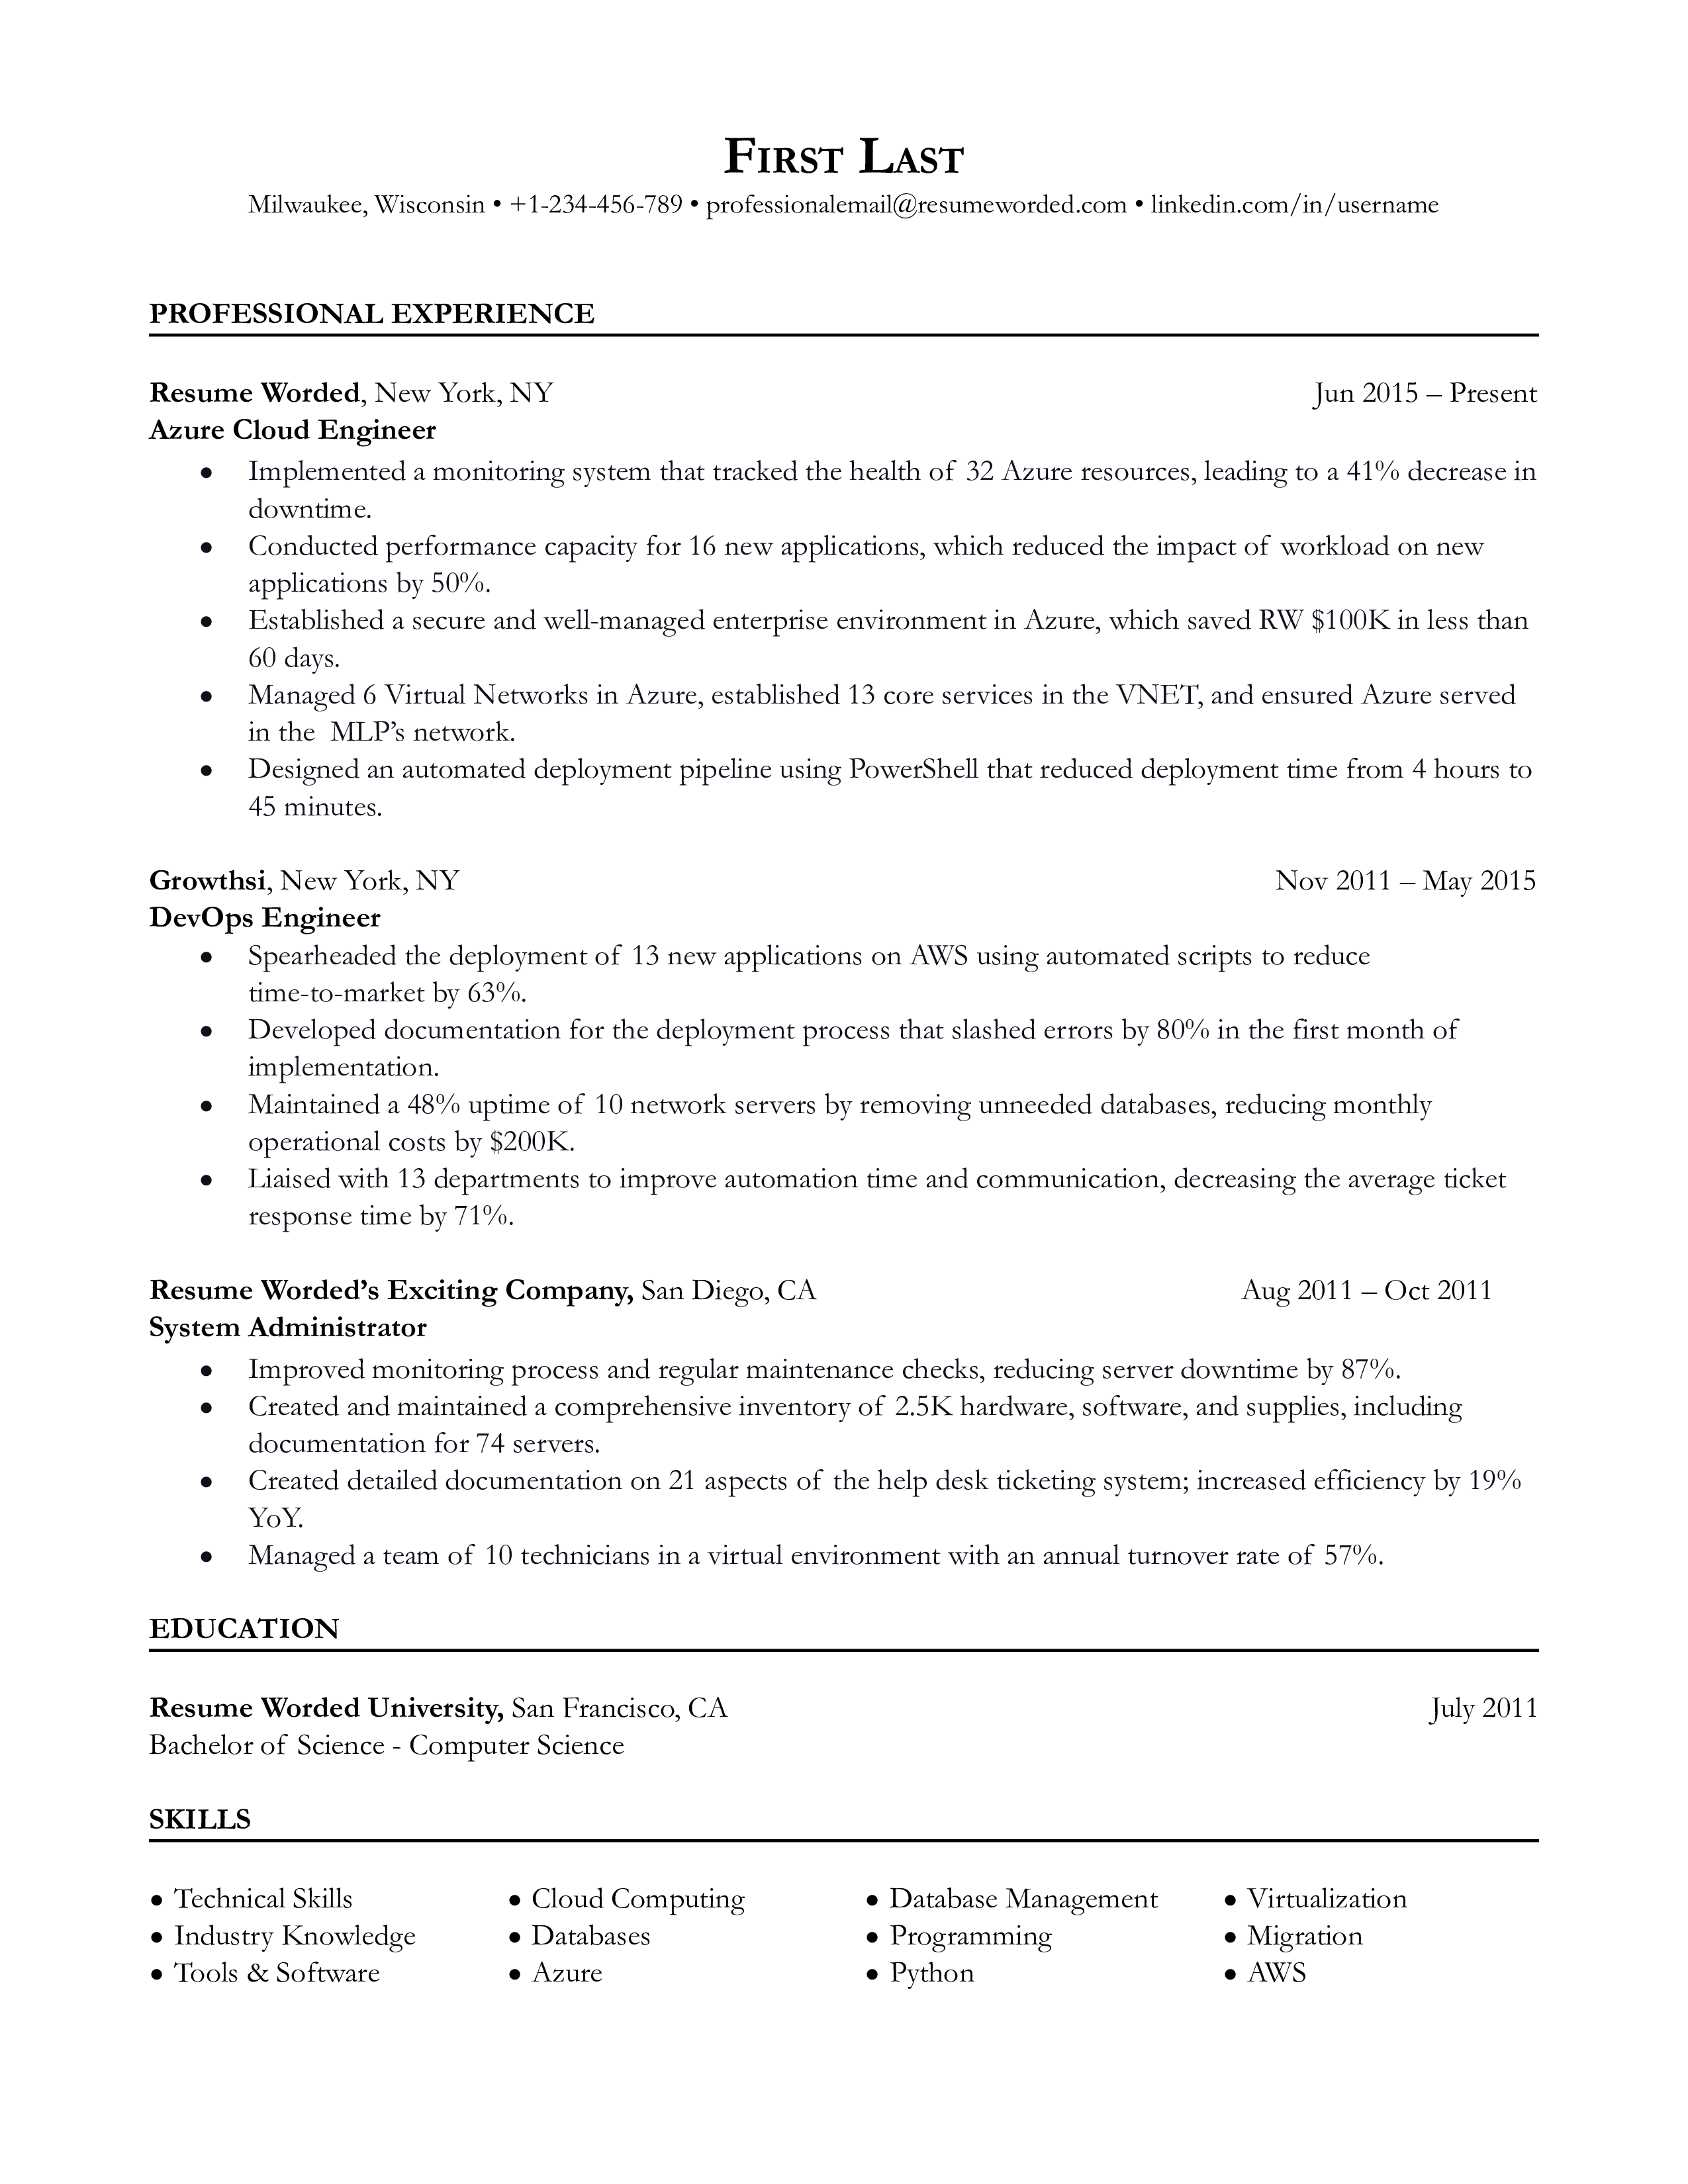 An Azure cloud engineer resume sample that highlights the candidate's Microsoft Azure qualifications and skills.